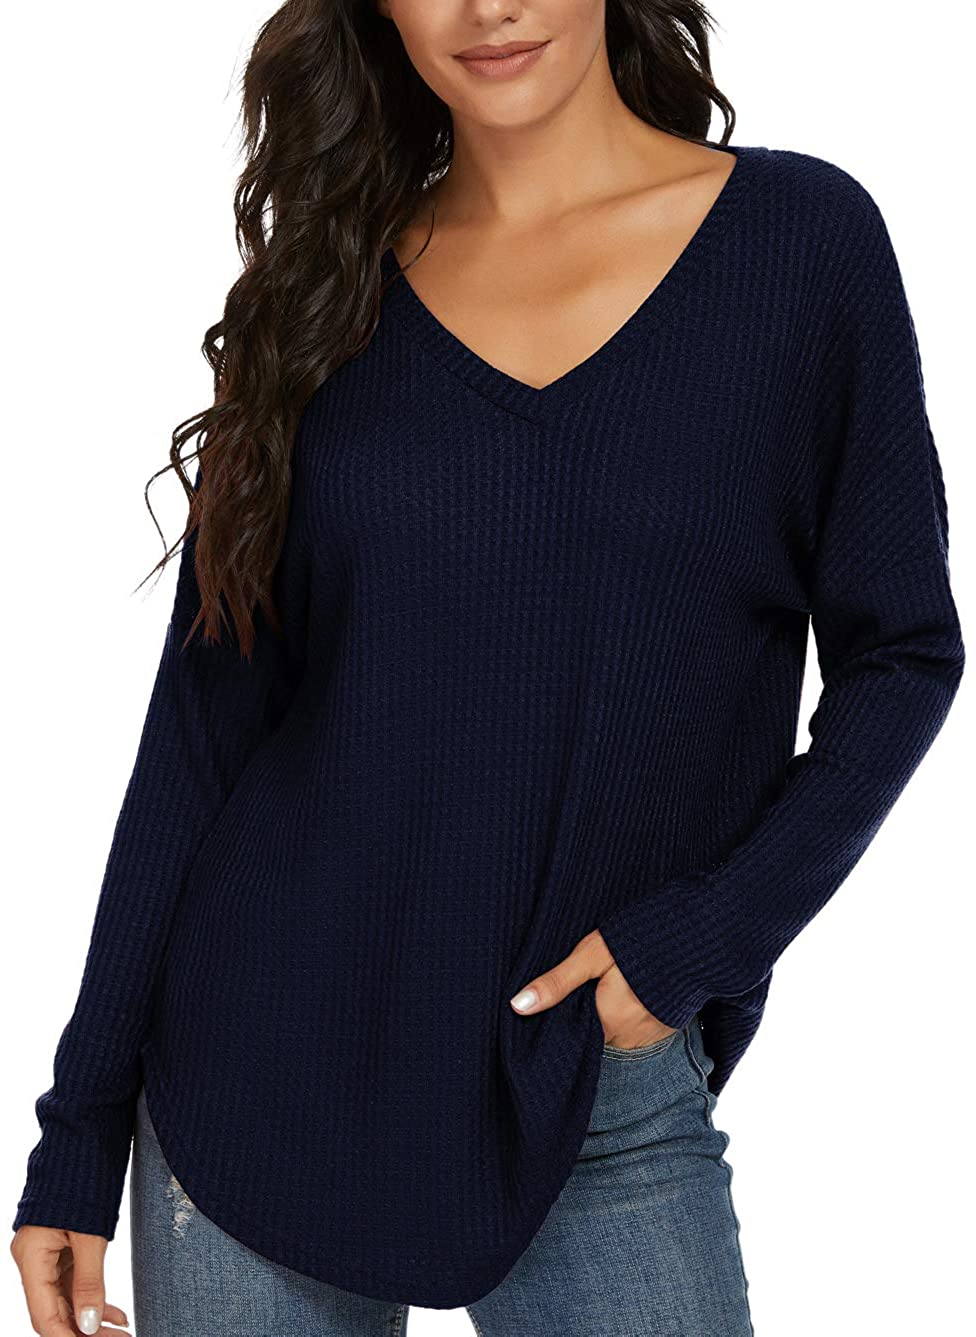 Feirose Womens Off Shoulder V Neck Pullover Waffle Knit Tops Tunic Sweater Shirts 